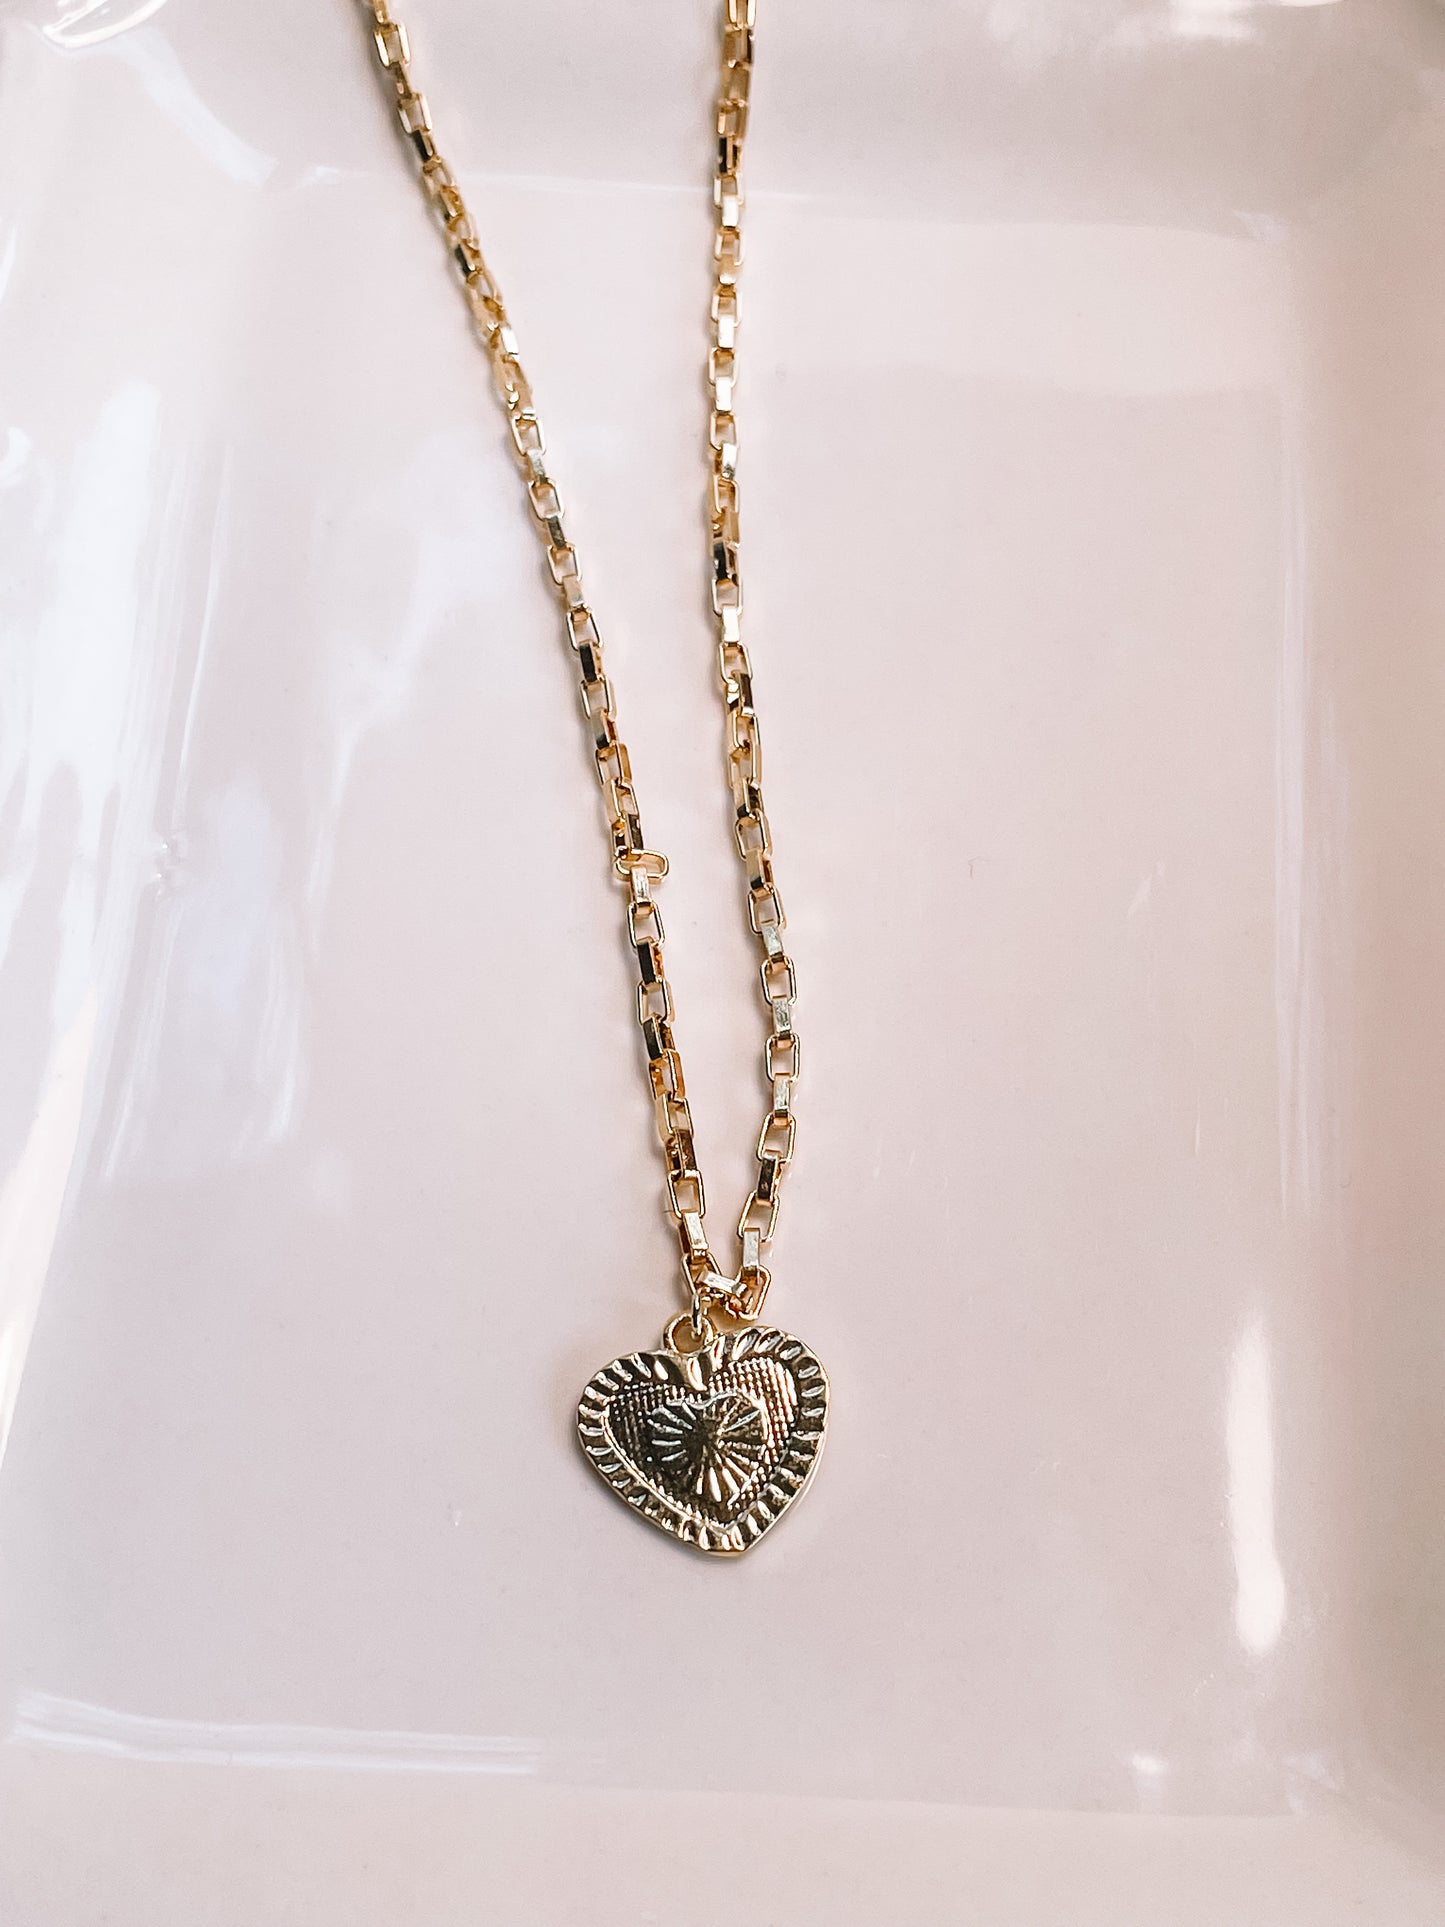 Lovers necklace